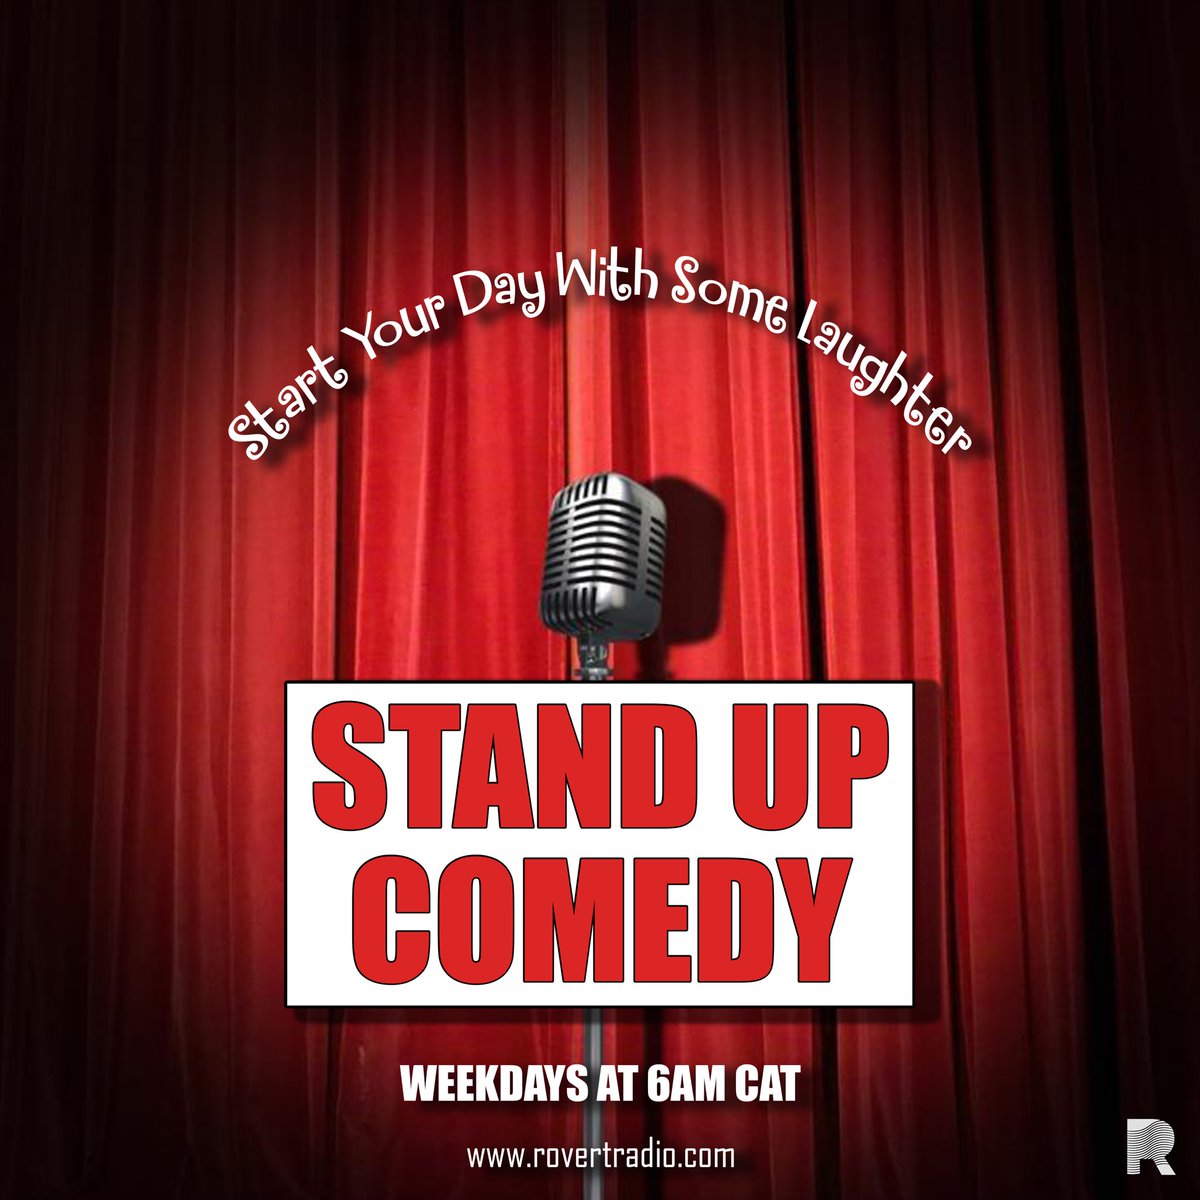 Buckle up for a laughter-filled Friday ride from 6AM CAT on rovertradio.com!
#RovertRadio #comedyshow #onlineradio